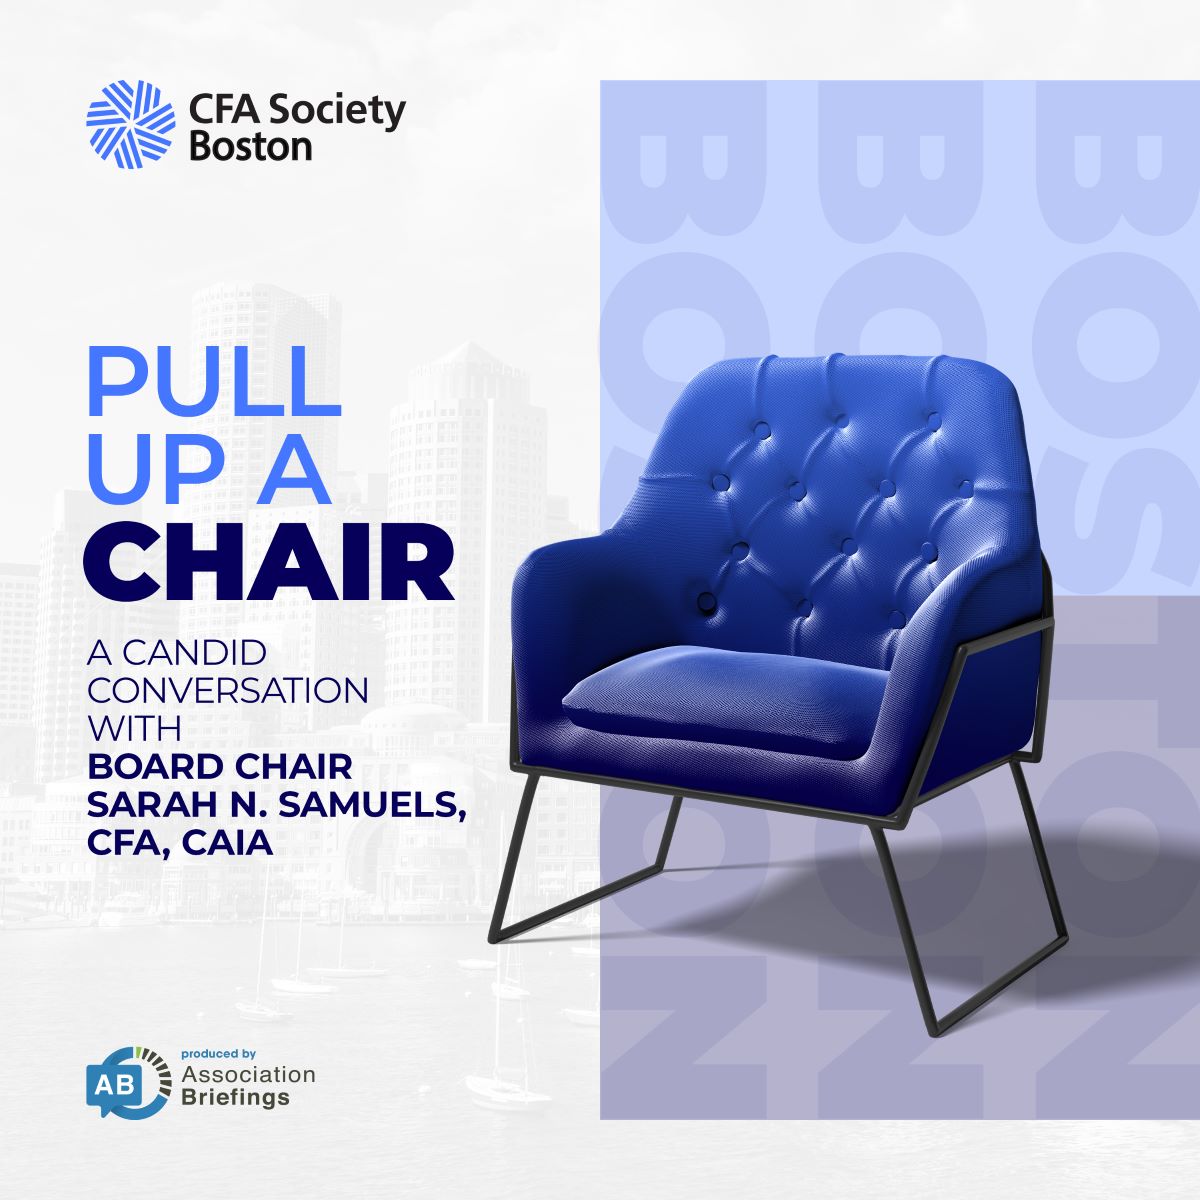 Promotional graphic for CFA Society Boston's Podcast, 